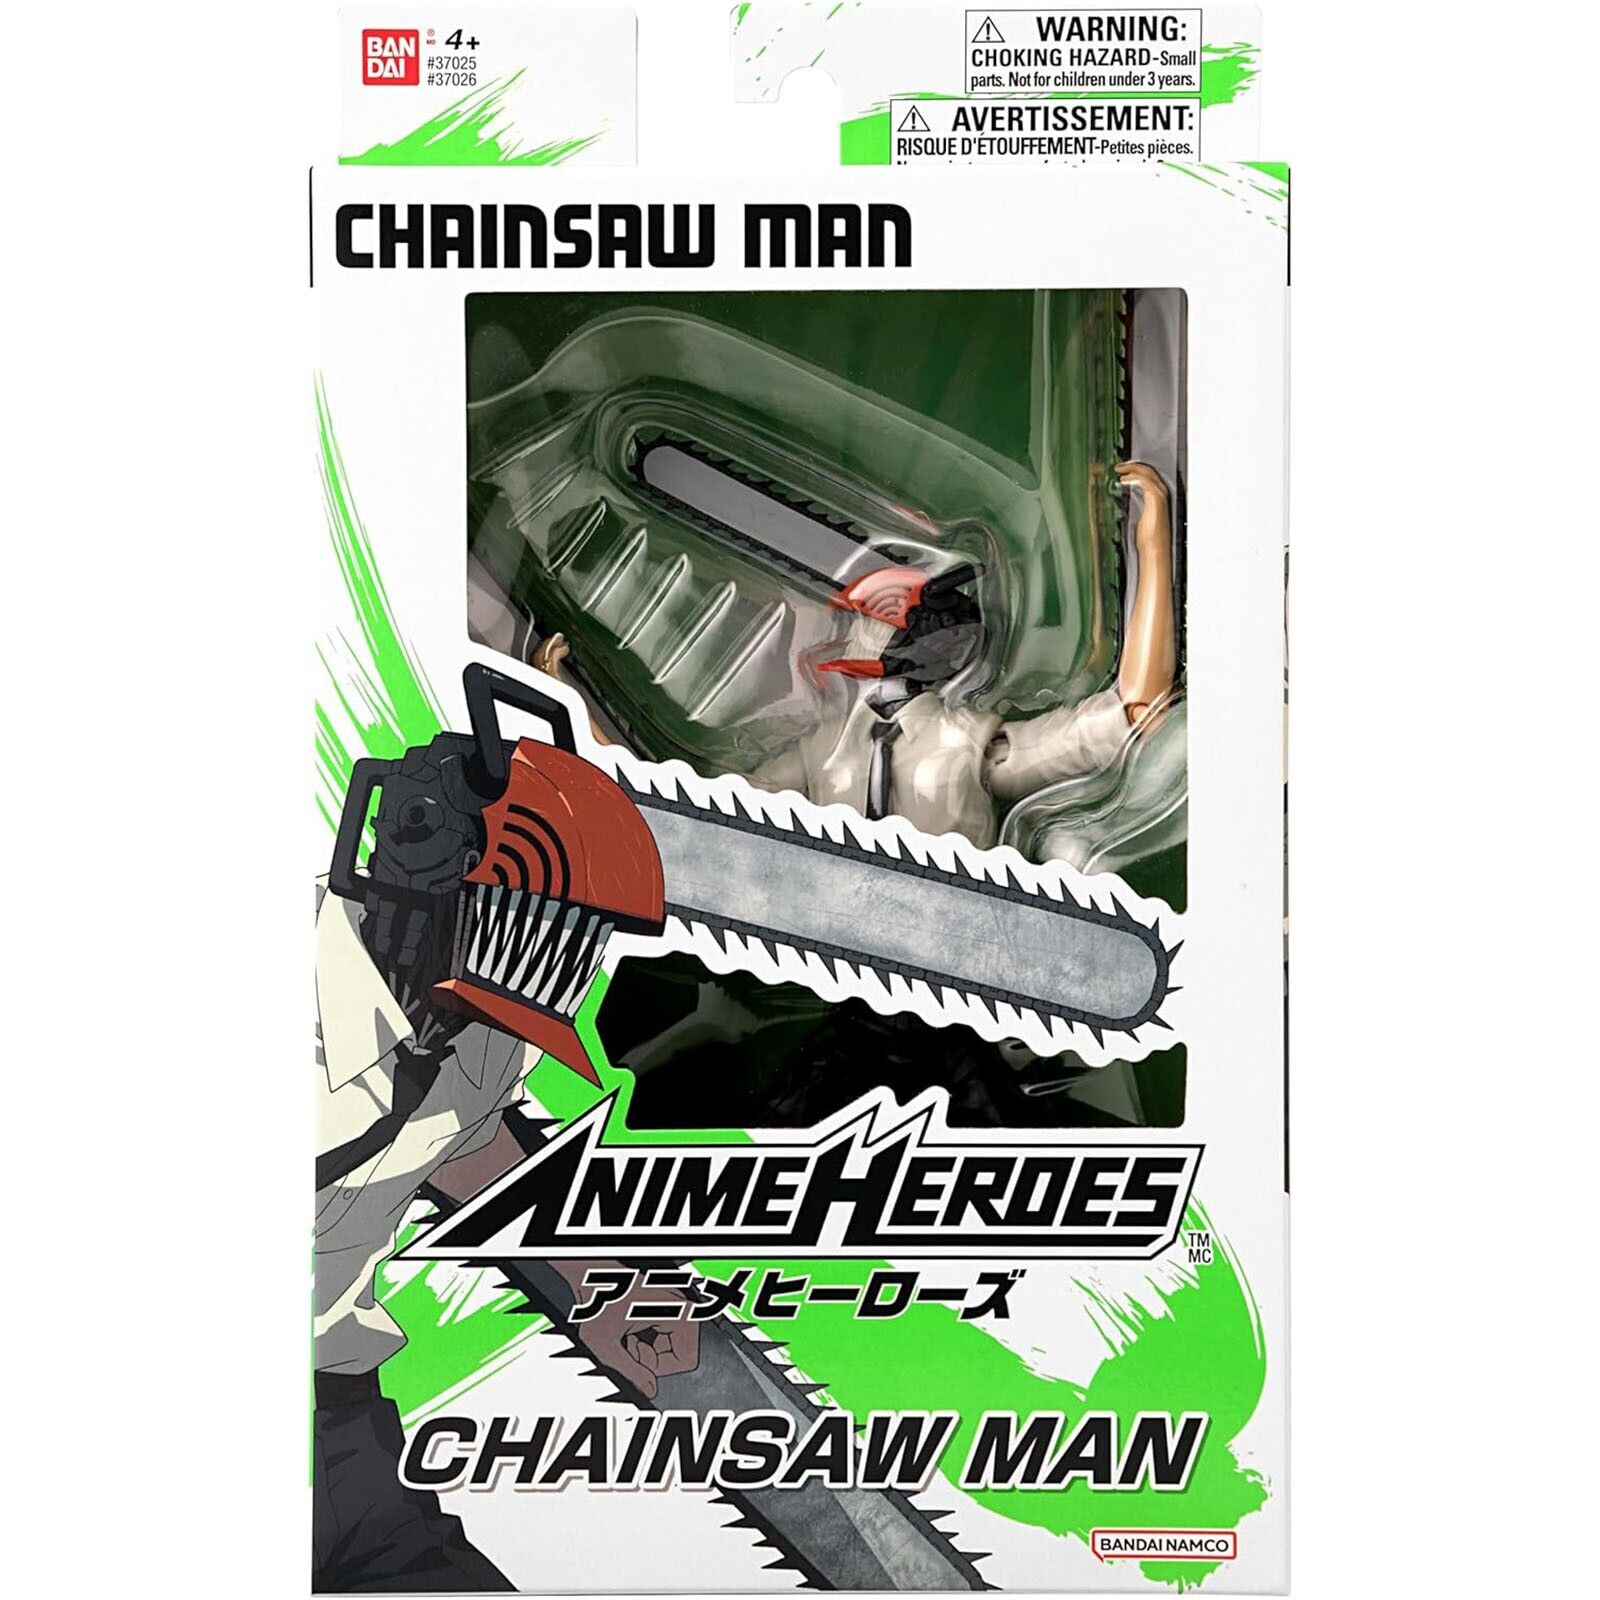 Bandai Anime Heroes Chainsaw Man 7 Inch Action Figure NEW IN STOCK